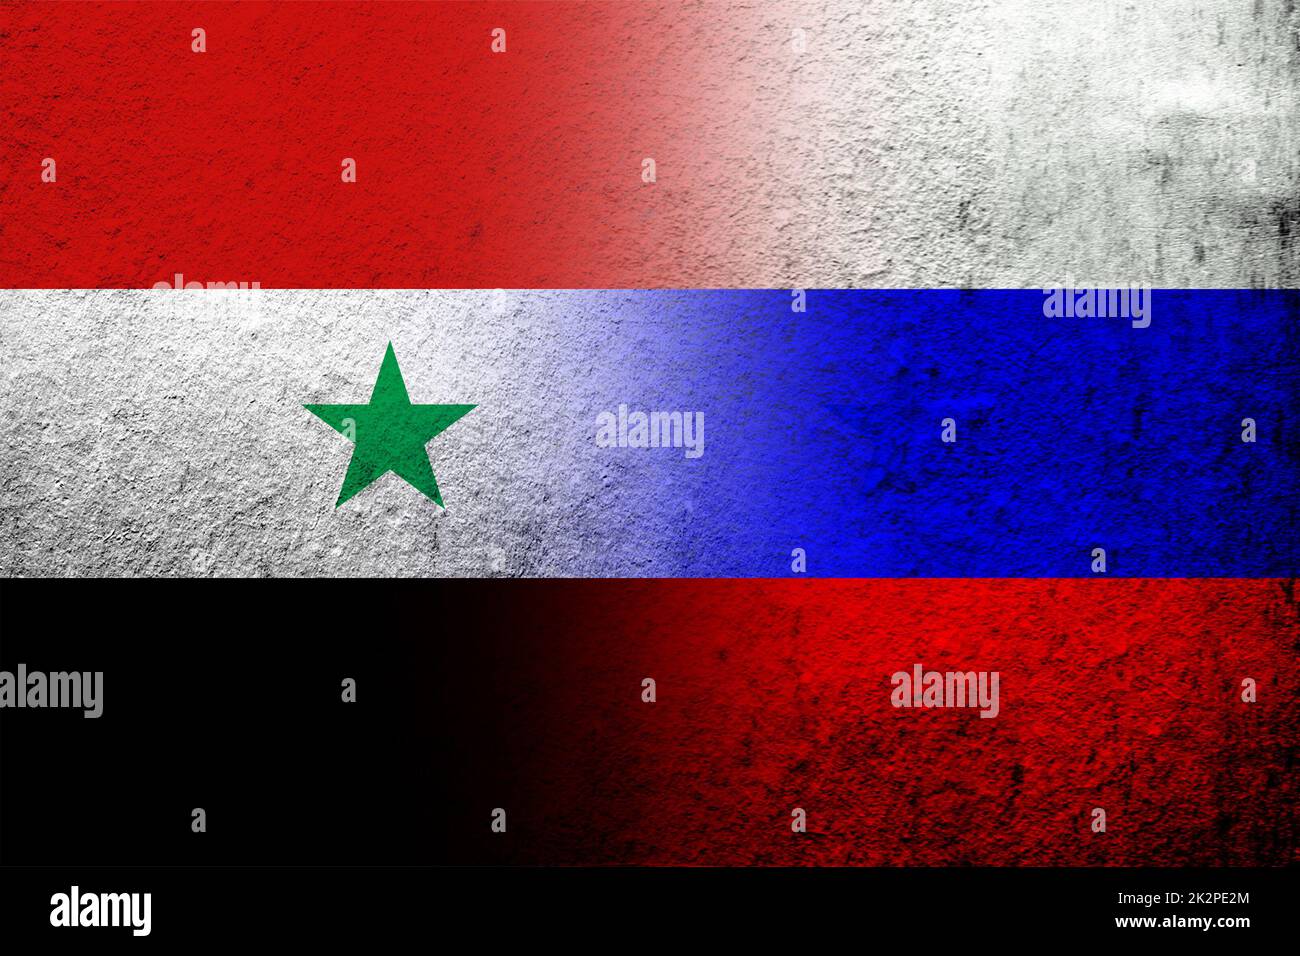 National flag of Russian Federation with The Syrian Arab Republic National flag. Grunge background Stock Photo